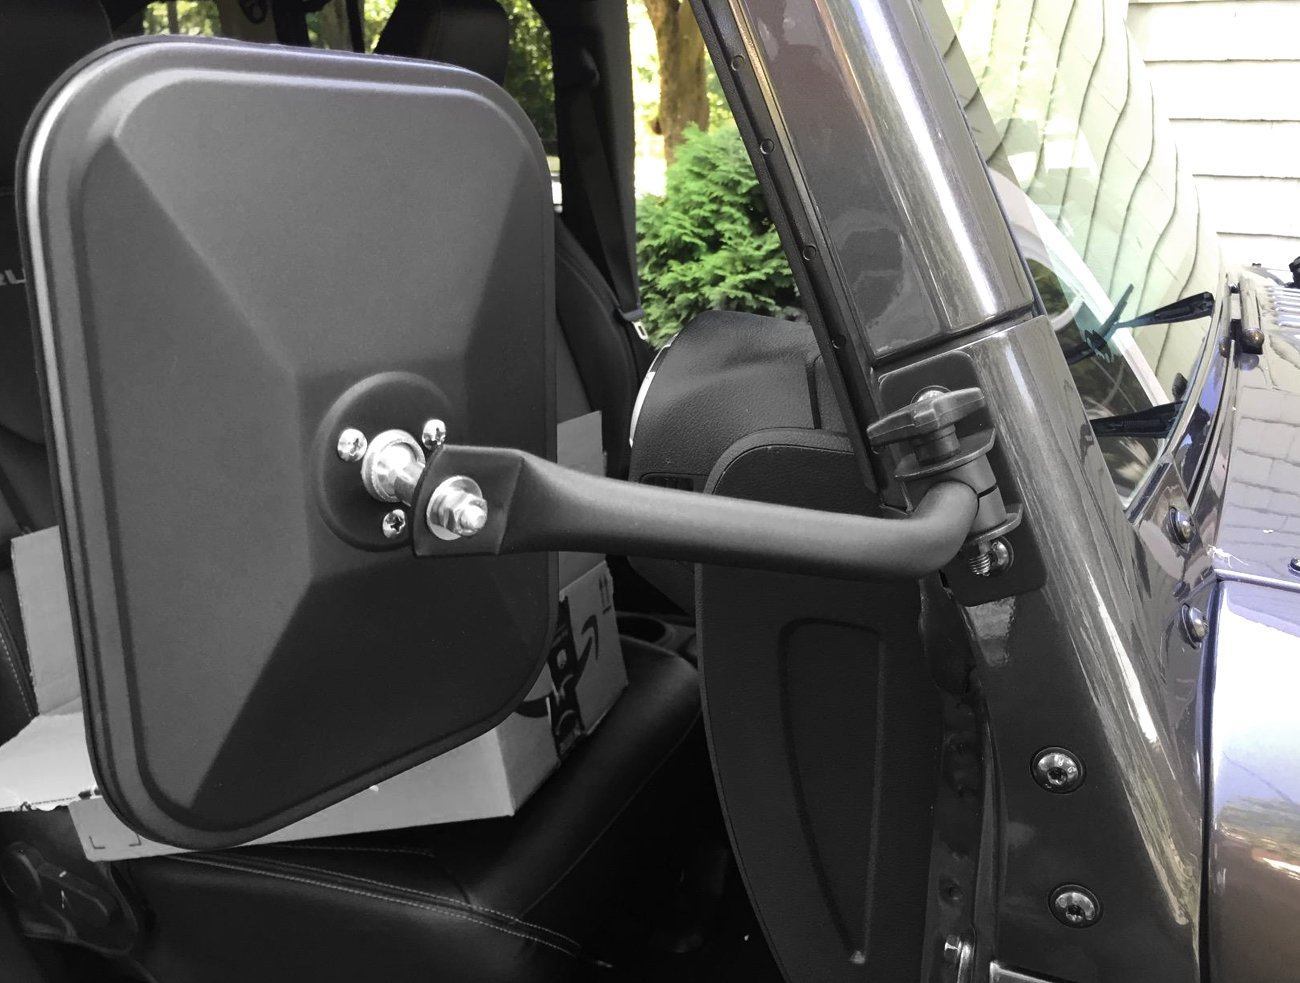 Rectangular Side Mirrors & Steel Left Side Foot Pedals Pegs Combo for 07-18 Jeep Wrangler JK/JKU丨Amoffroad